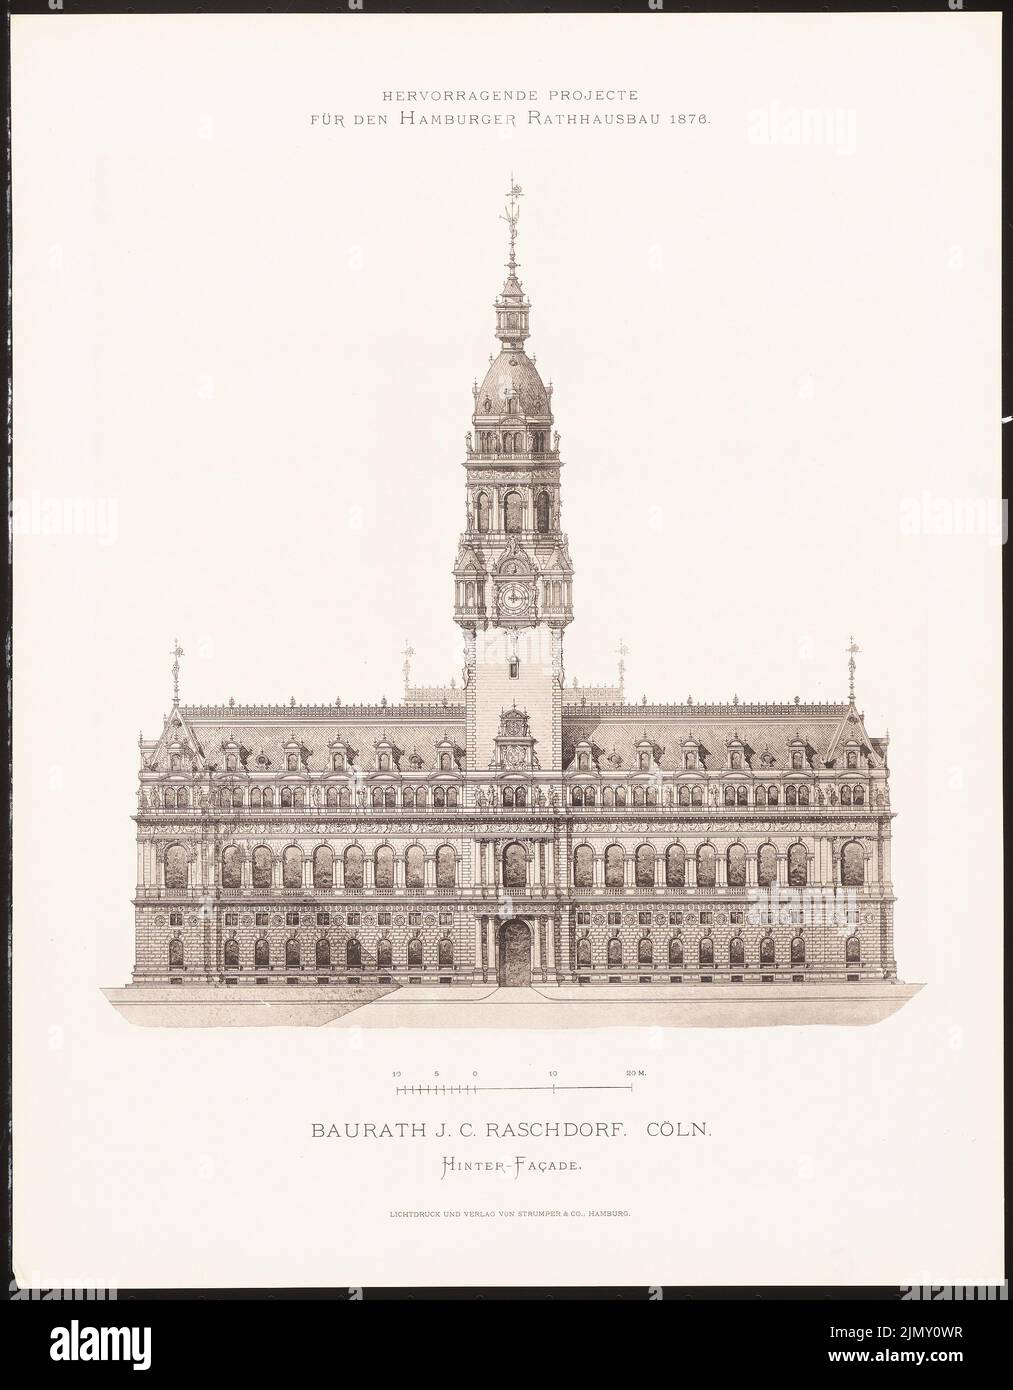 Raschdorff Julius (1823-1914), excellent projects for the Hamburg town hall building in 1876 (1876-1876): View from behind. Light pressure on paper, 45.1 x 35.2 cm (including scan edges) Stock Photo